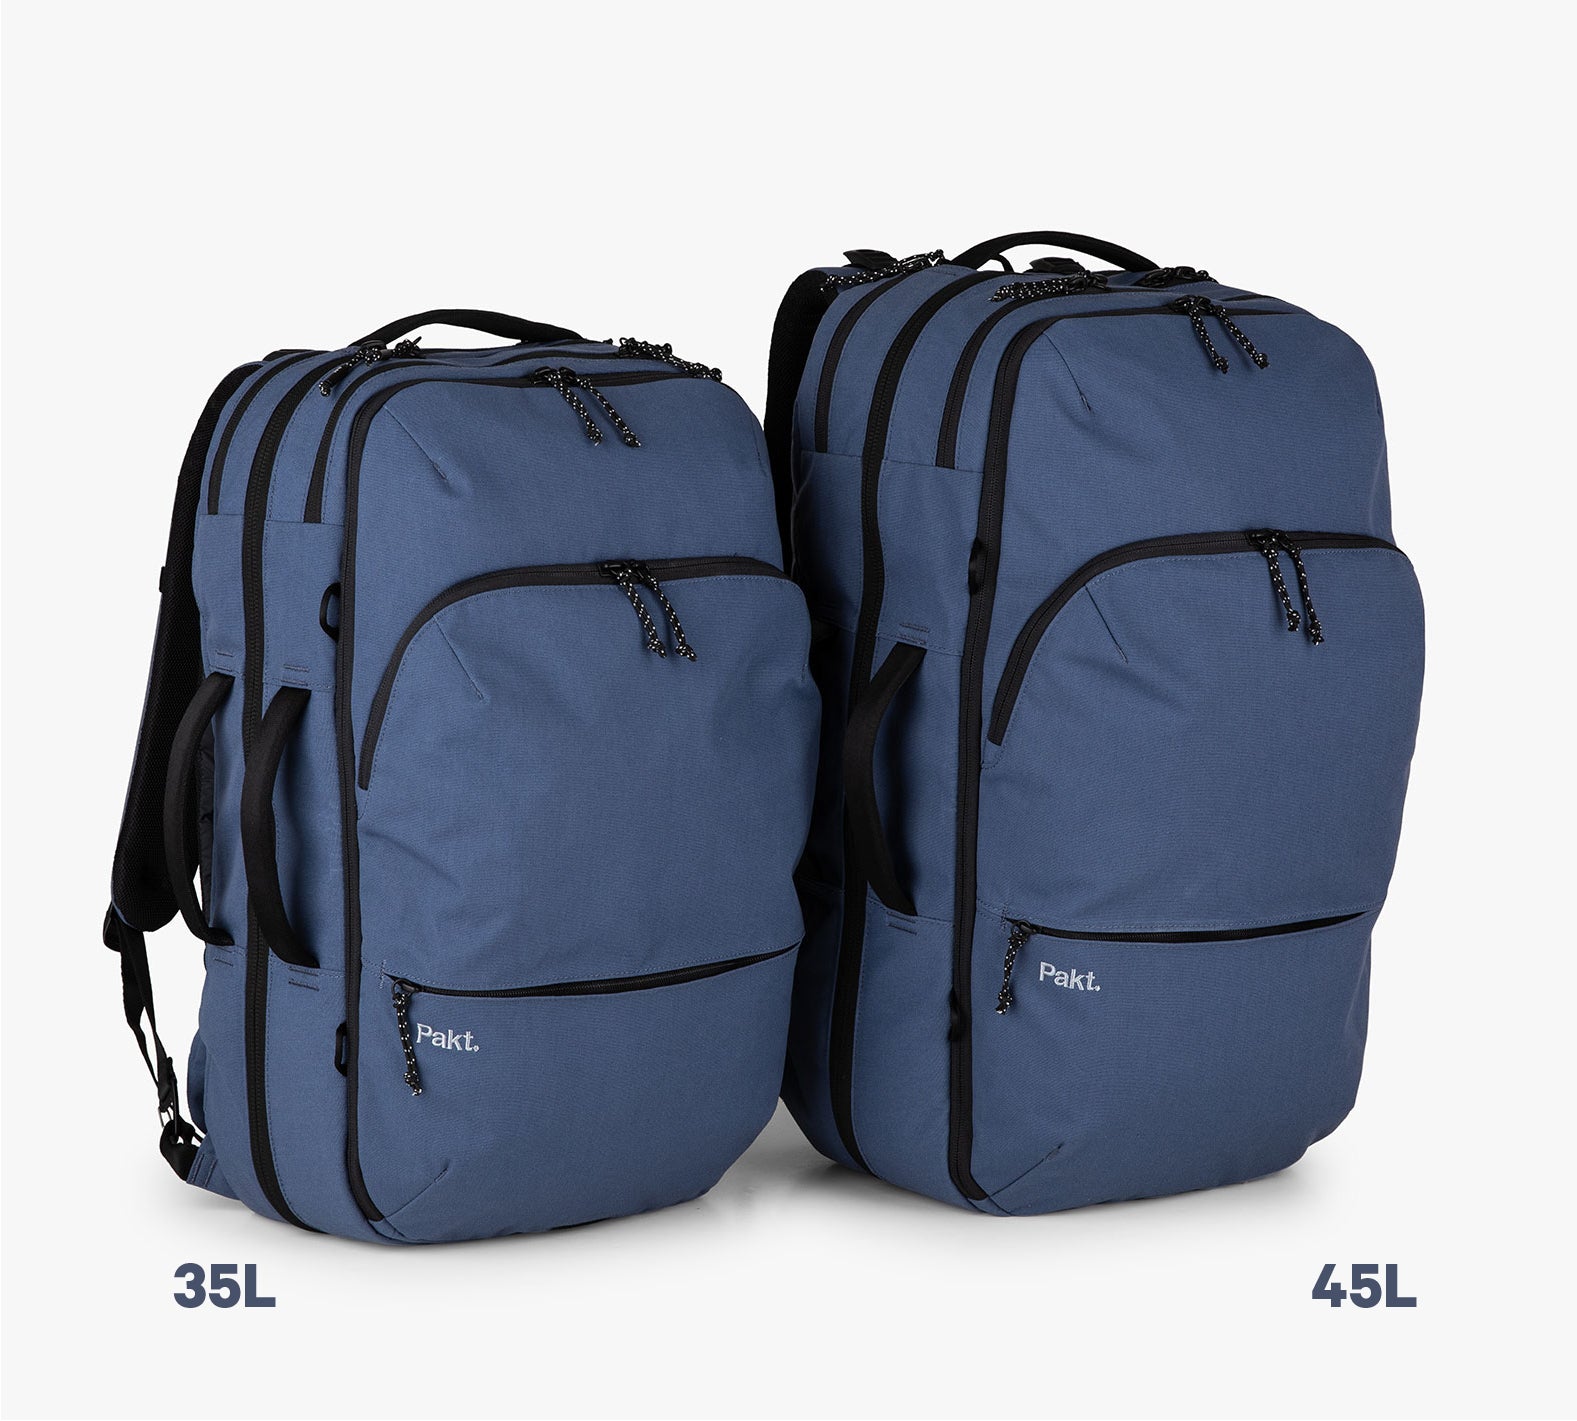   Basics Carry-On Travel Backpack - Navy Blue | Casual  Daypacks